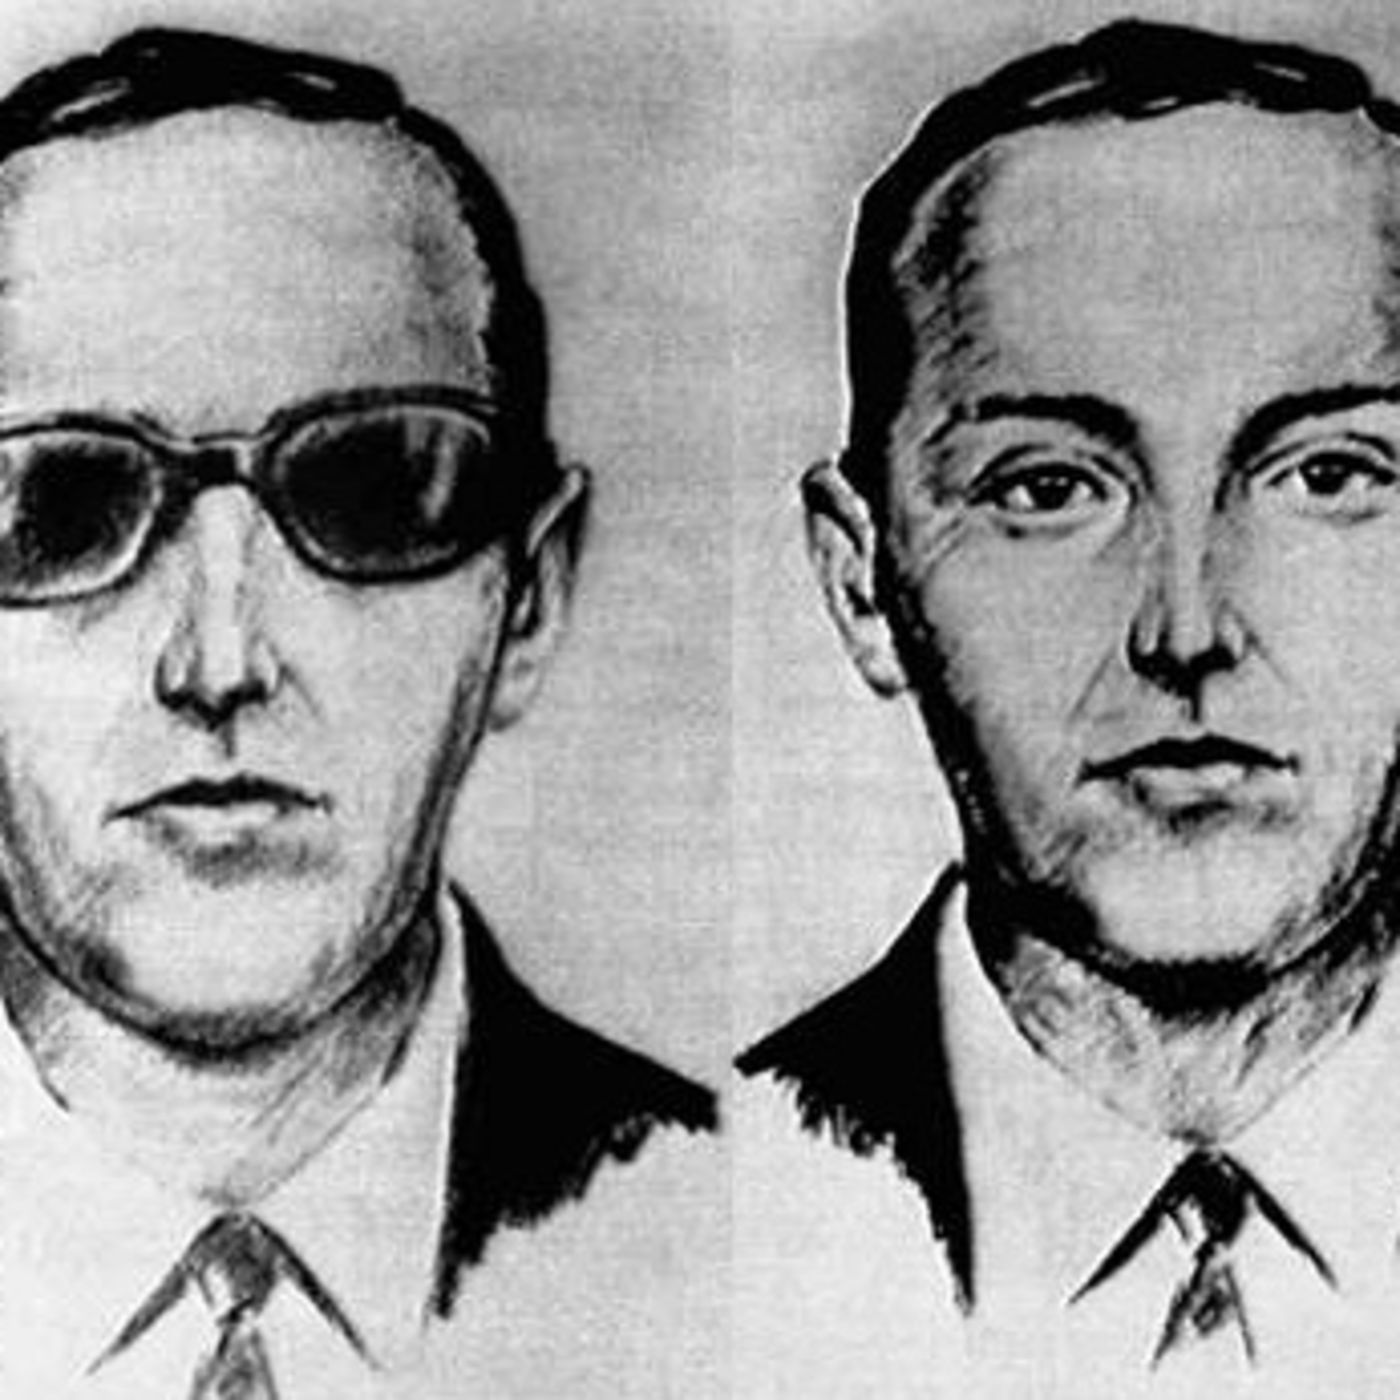 Experiment 009 - Hangin' With Mr. (D.B.) Cooper